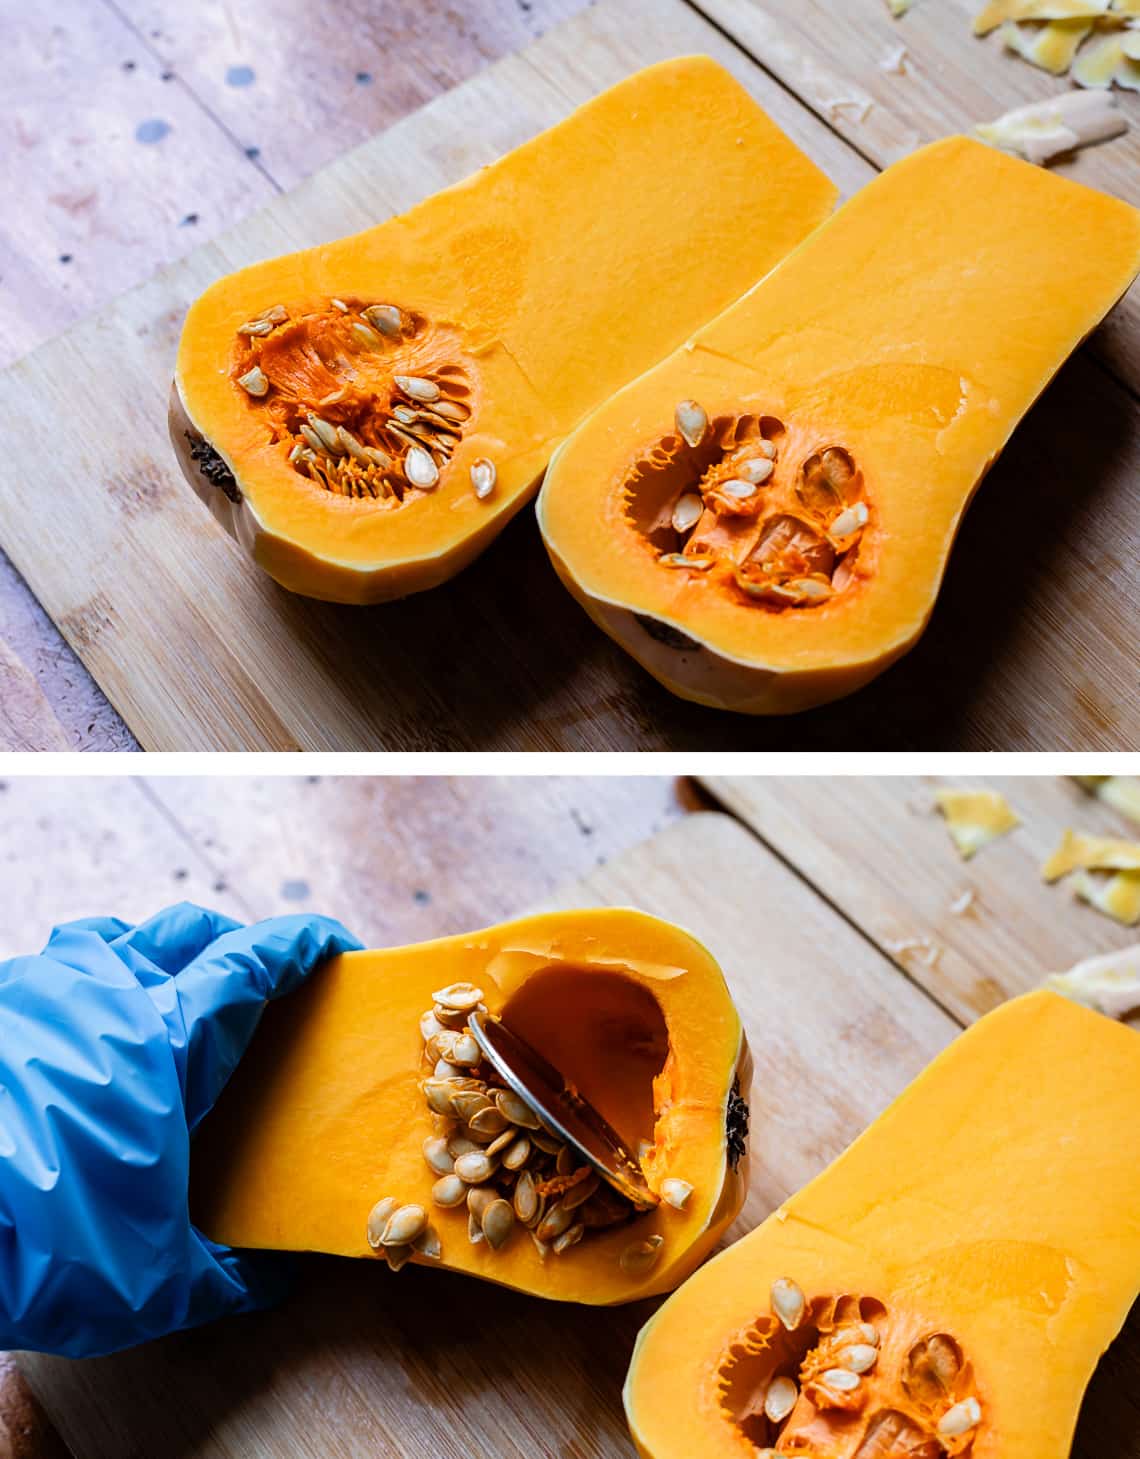 top vertically sliced butternut squash, bottom using a mason jar lid to scoop out the guts.